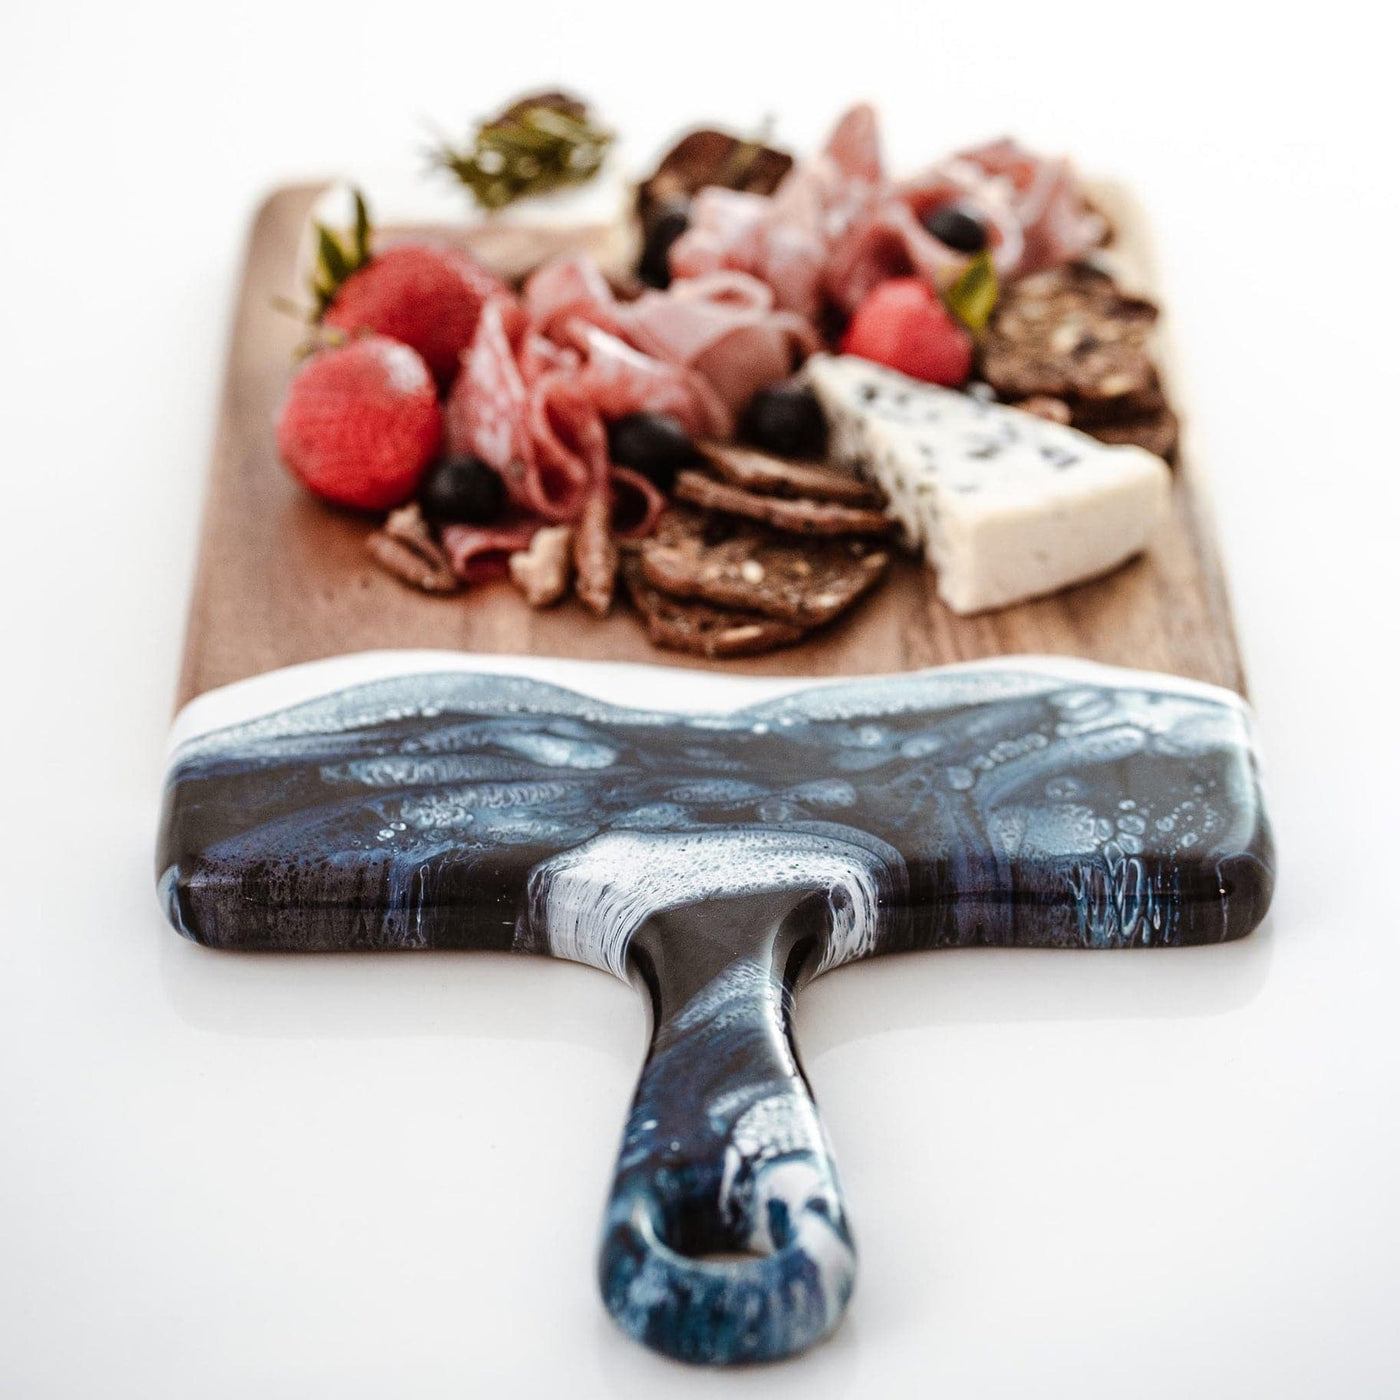 Acacia Resin Cheeseboards (SALE) - The Local Space